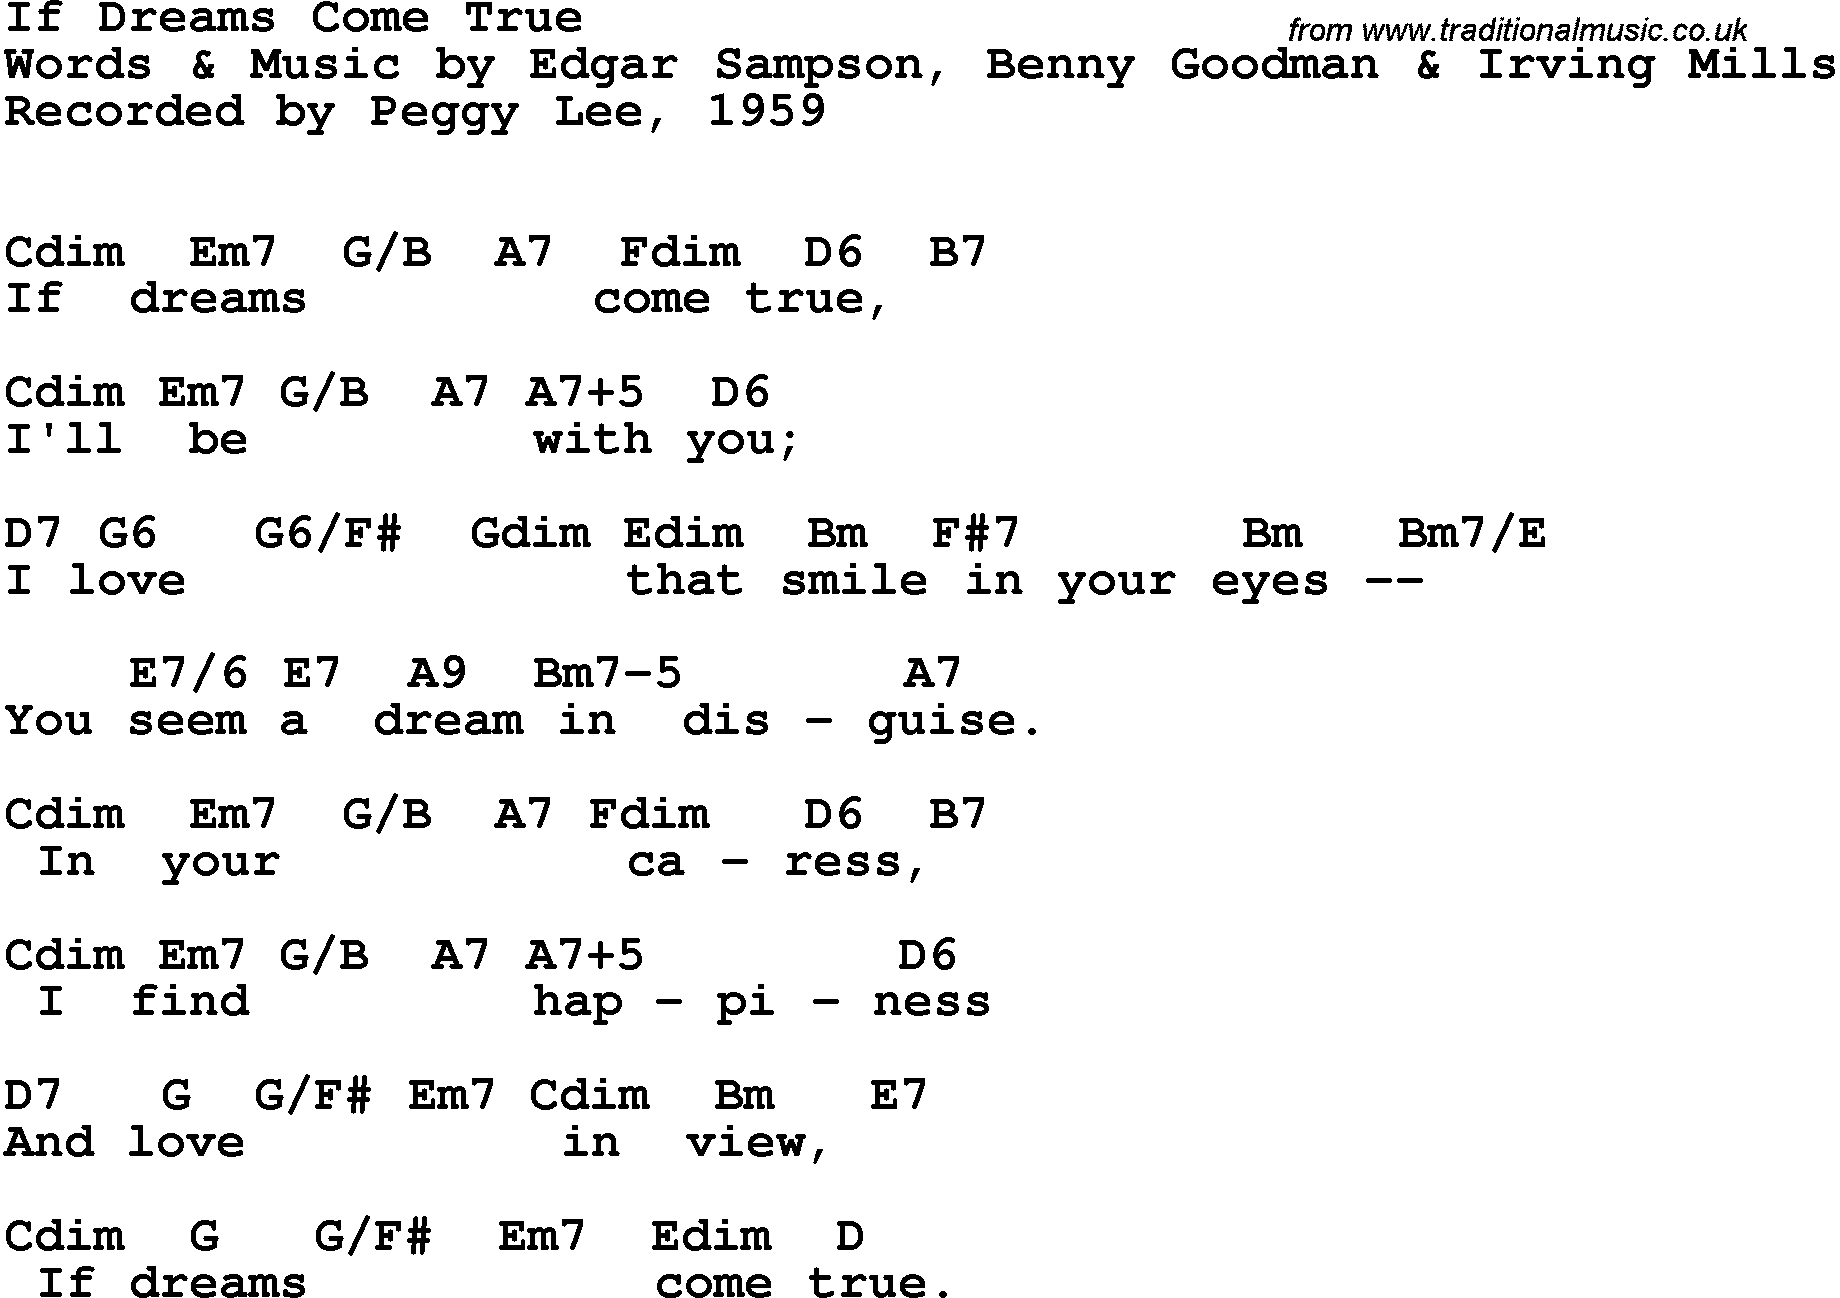 Song Lyrics with guitar chords for If Dreams Come True - Peggy Lee, 1959